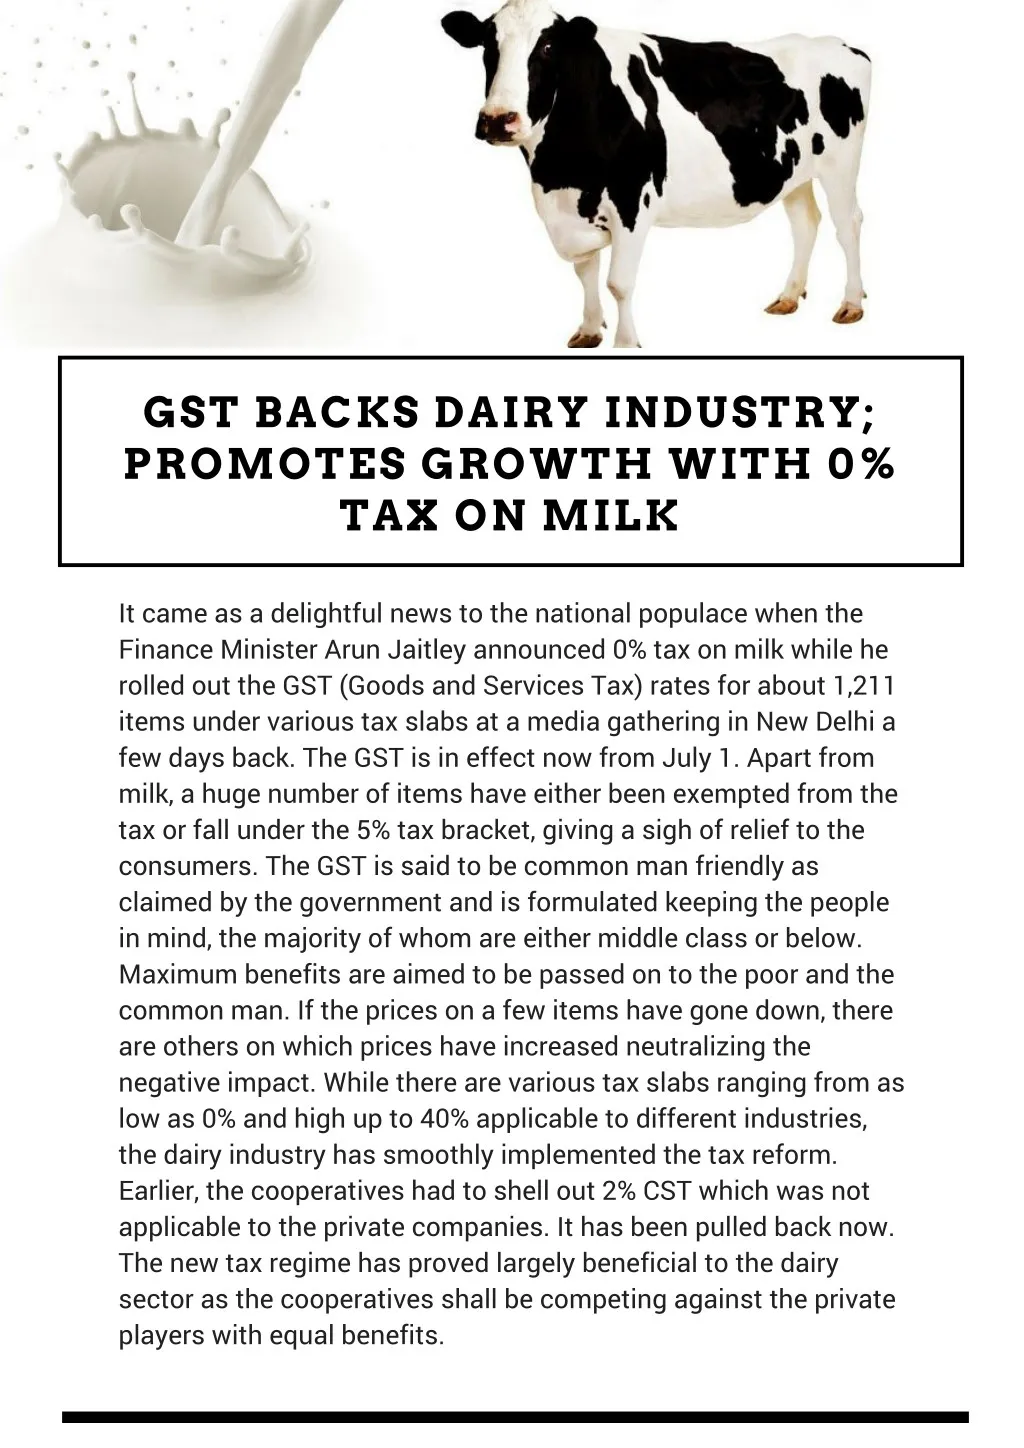 gst backs dairy industry promotes growth with